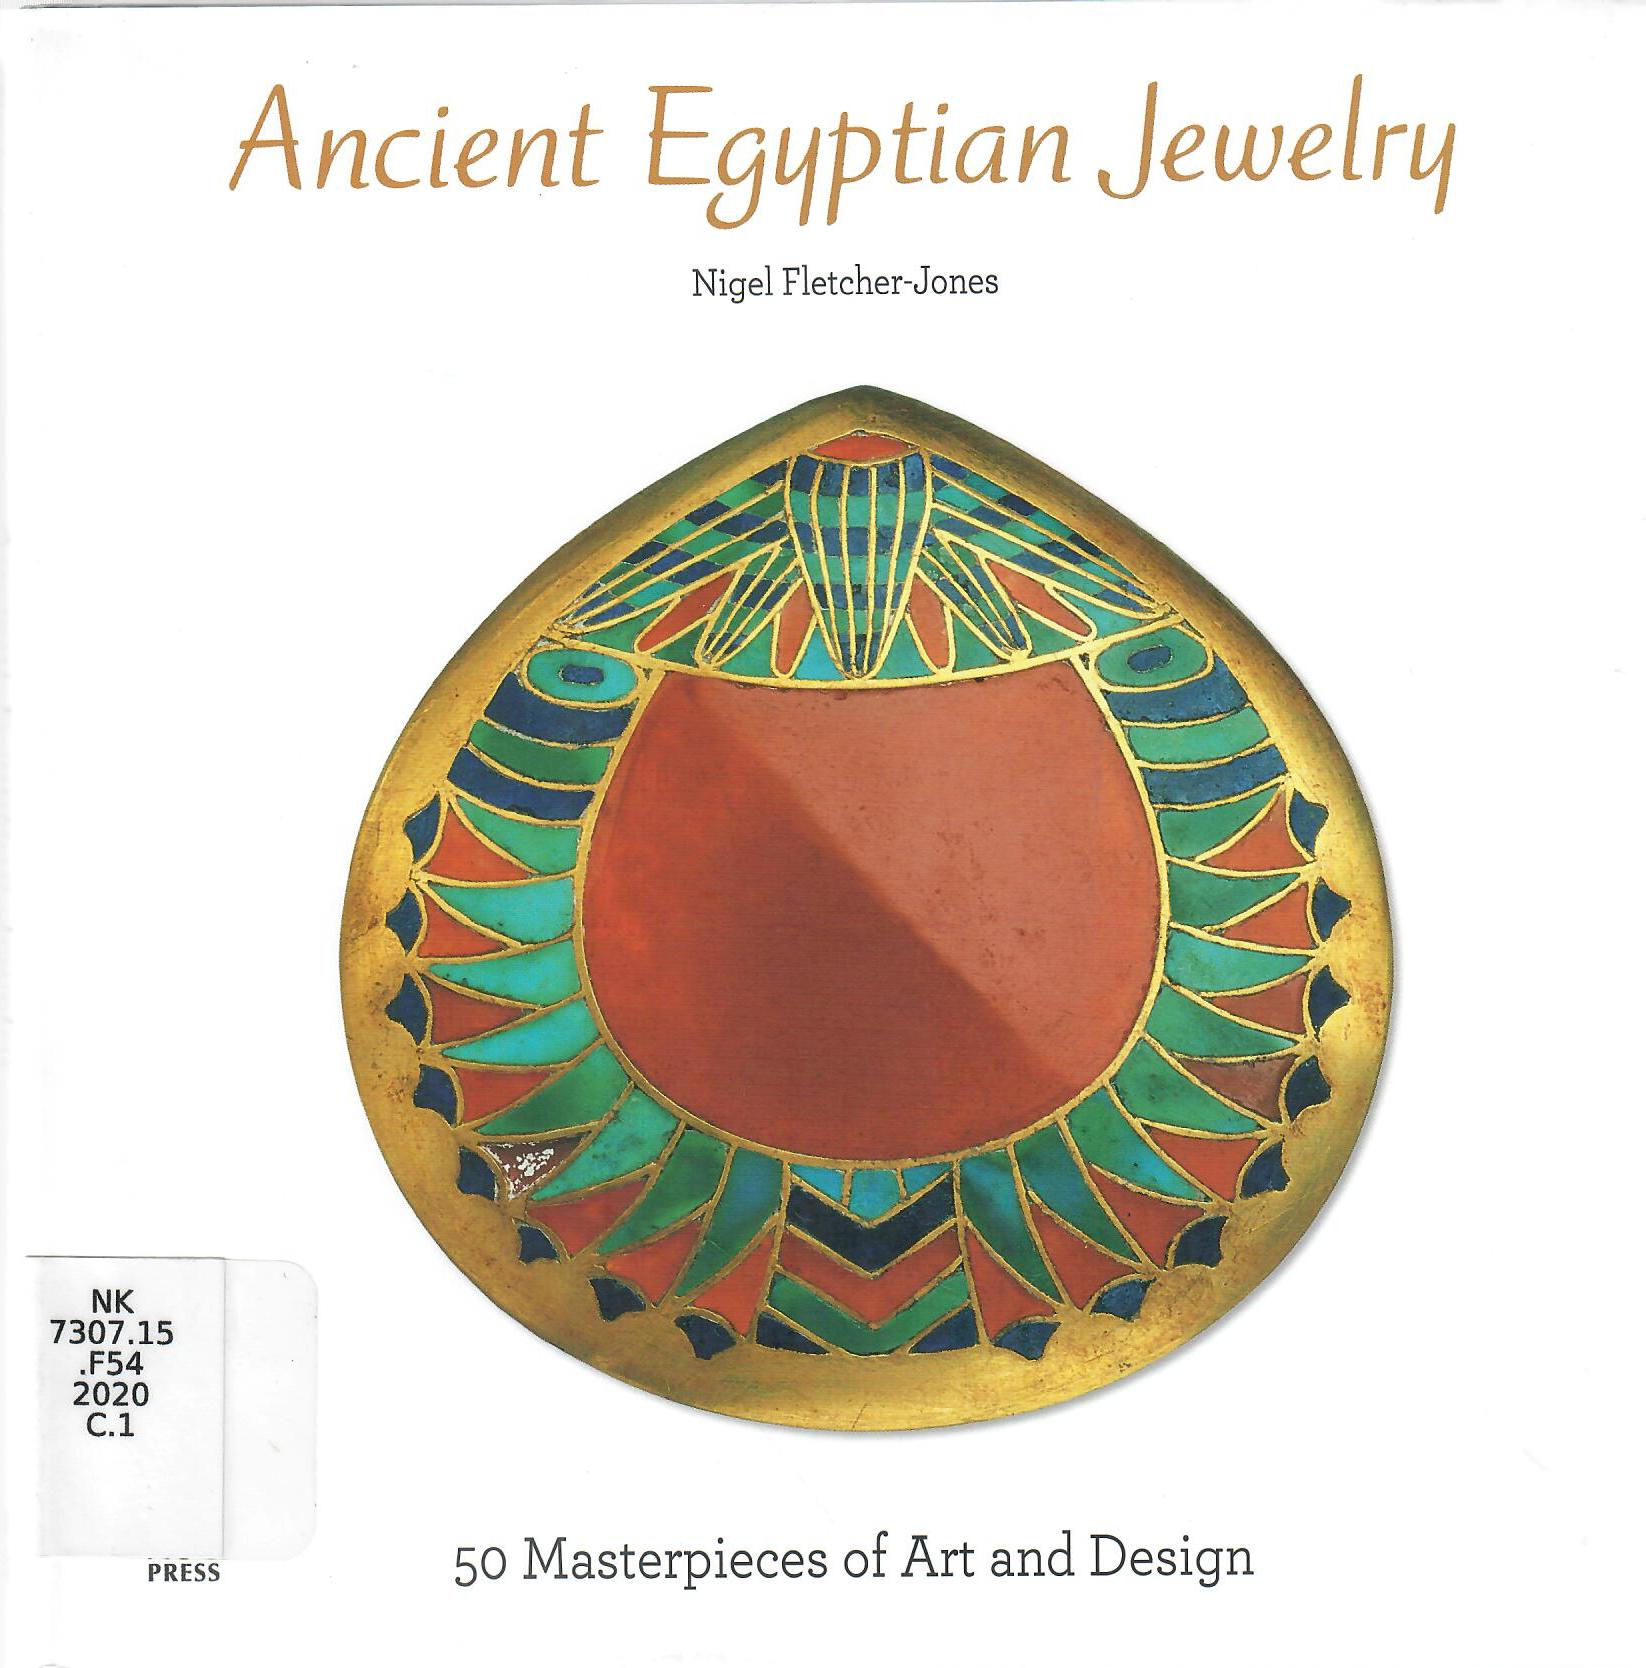 Ancient Egyption Jewelry